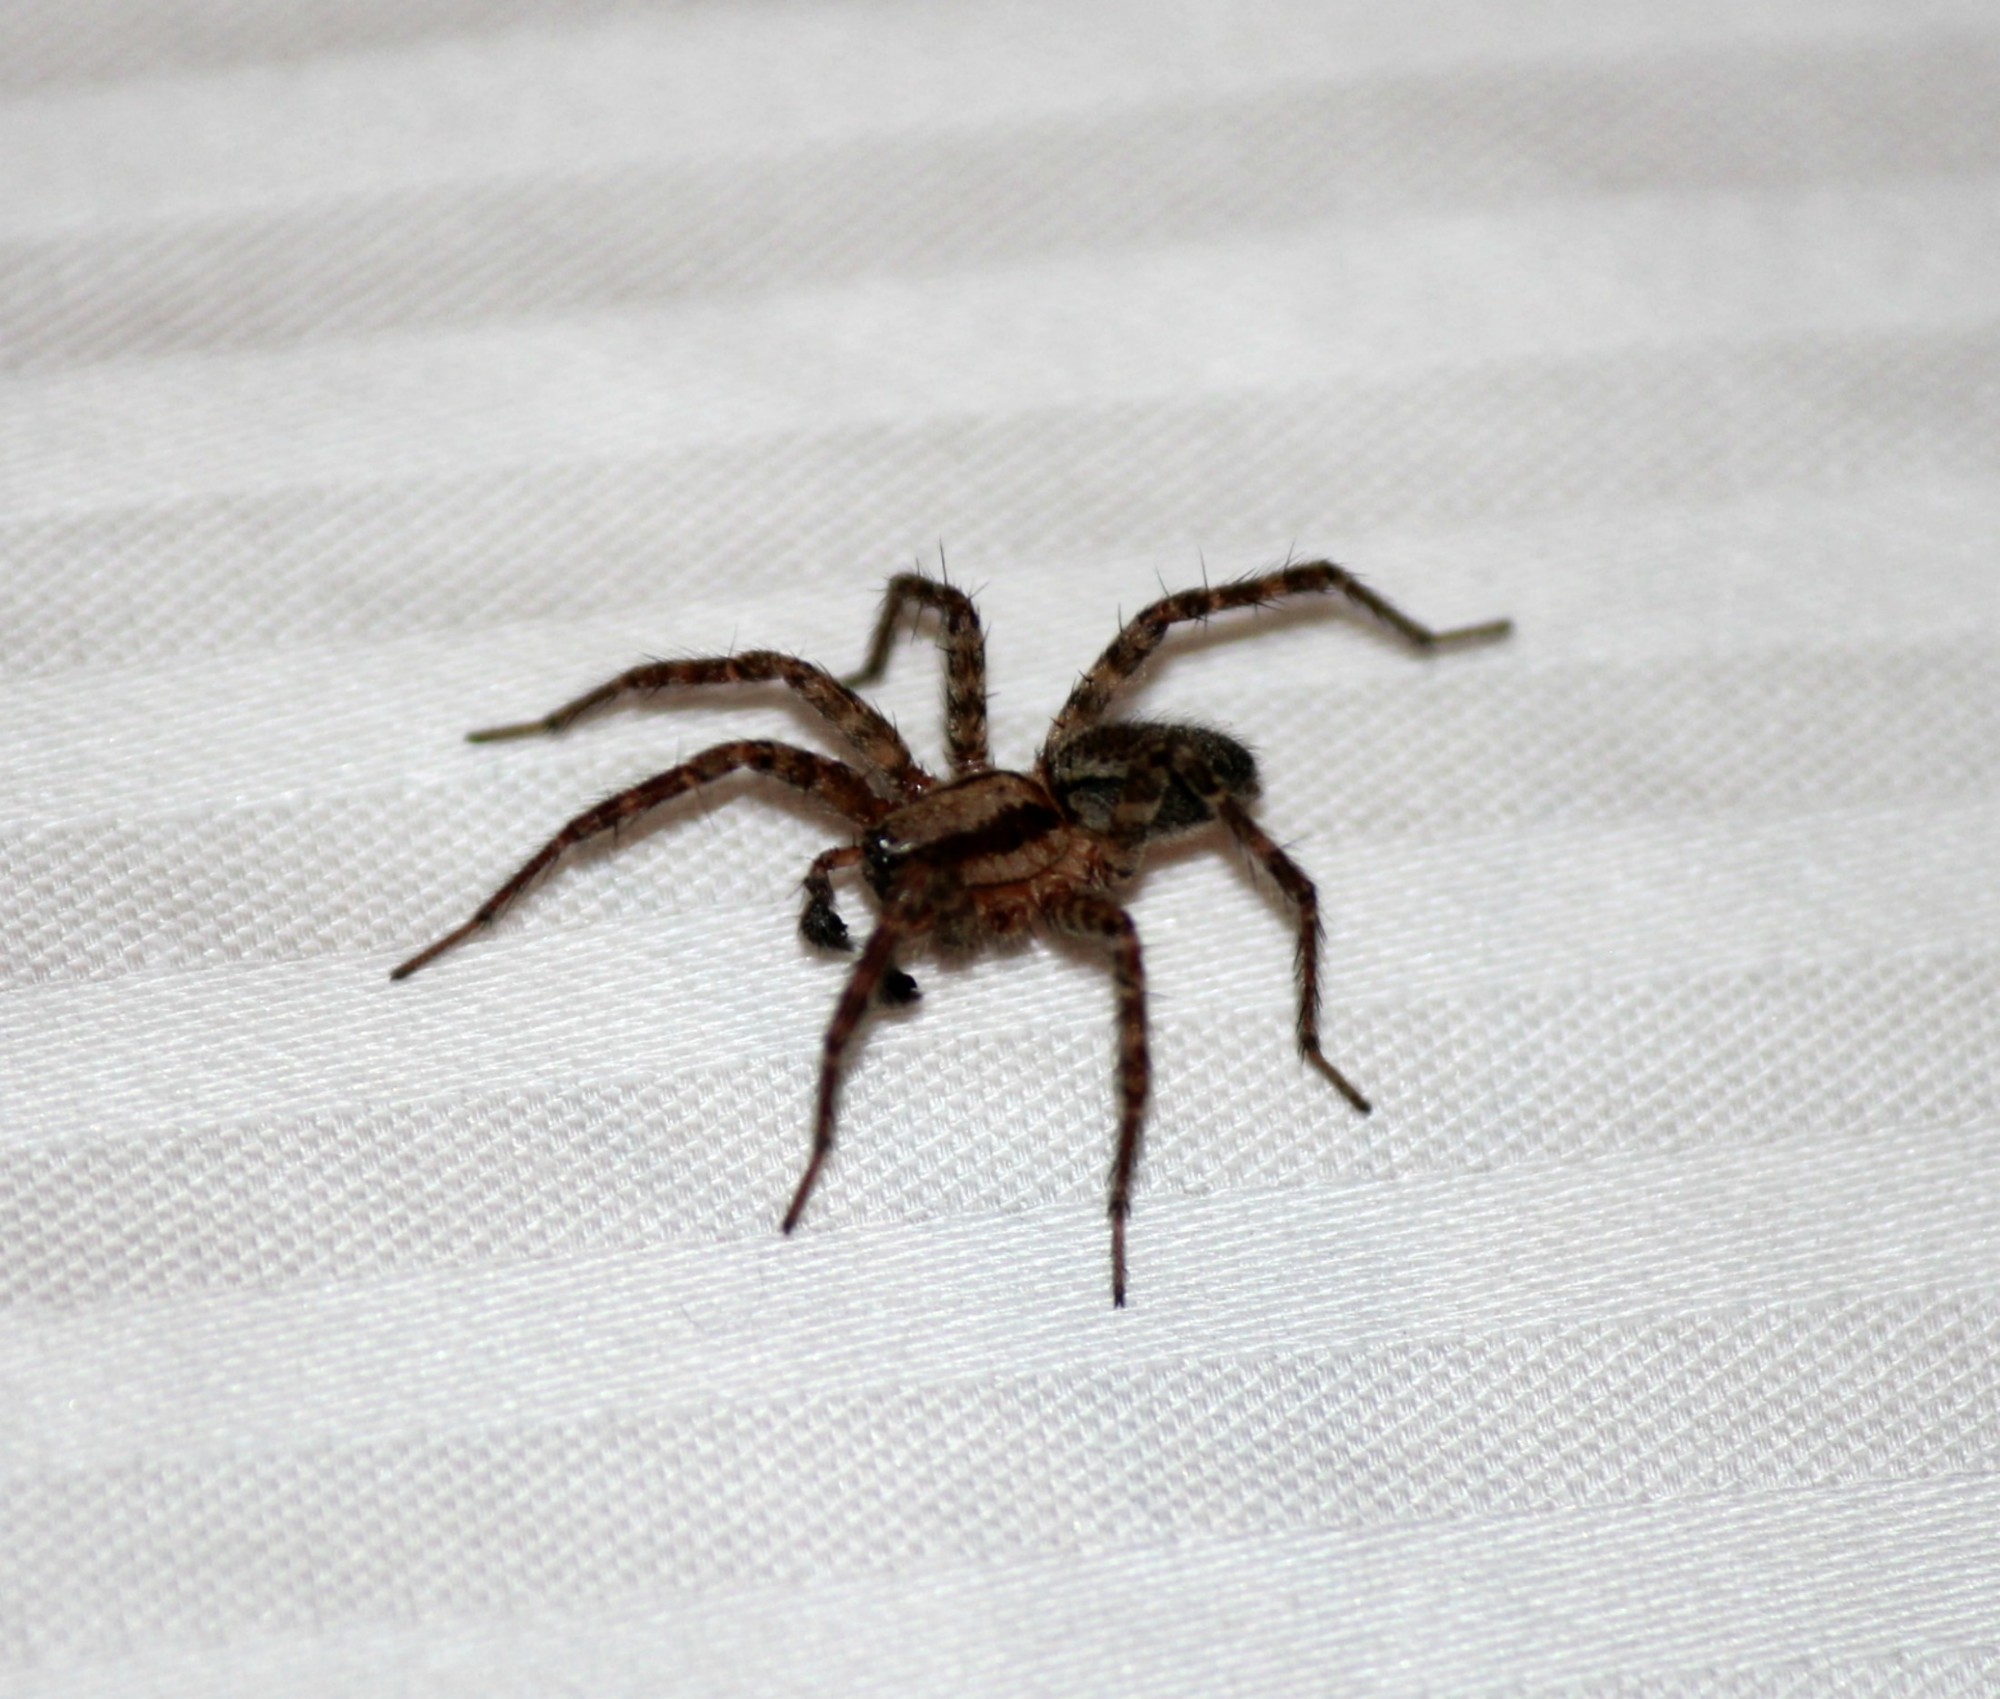 Are House Spiders More Common in the Winter?